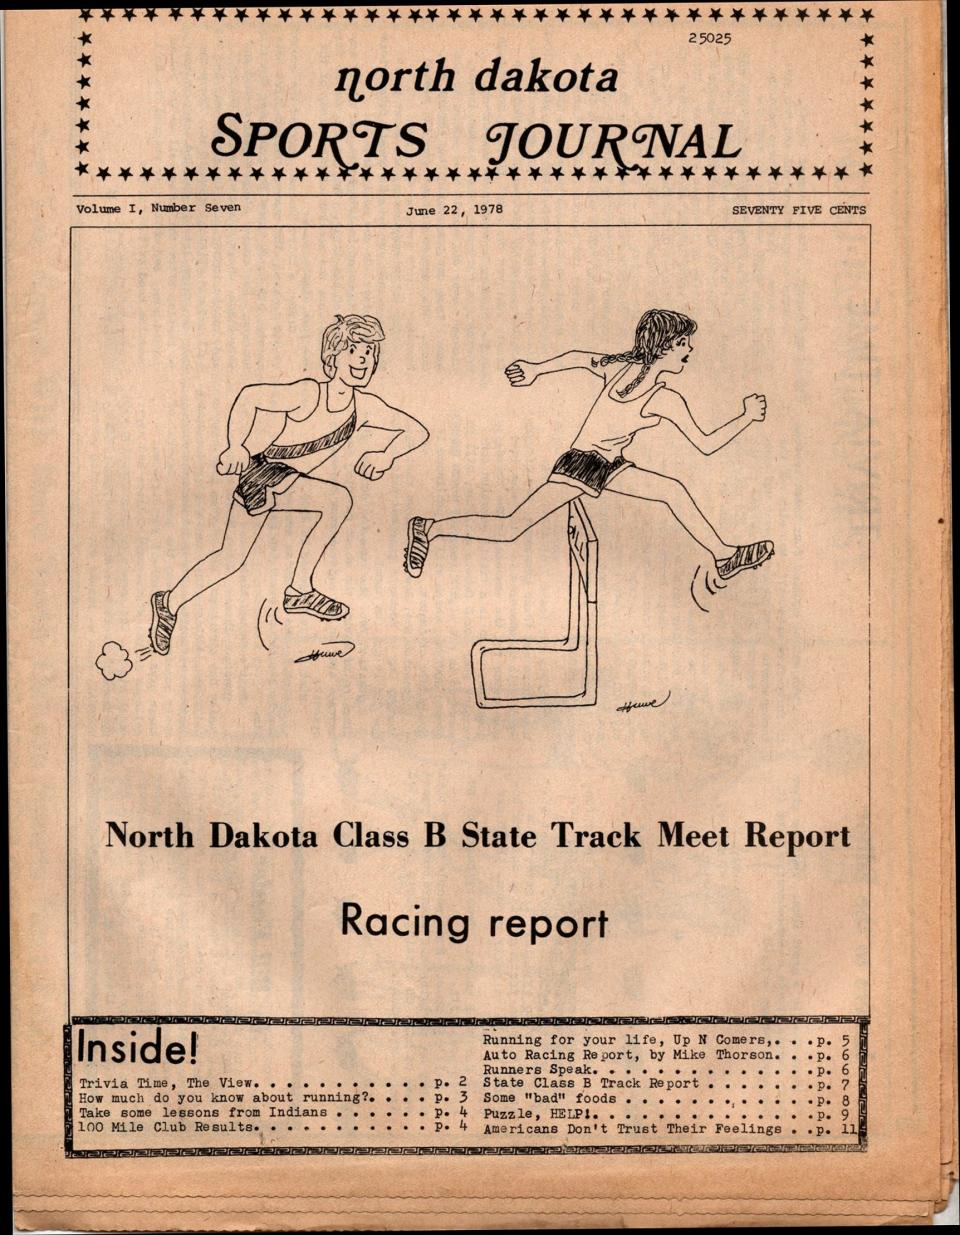 The North Dakota Class B State Track Meet Report graces the cover of this June 22, 1978, issue. Drawing by then 16-year-old Diane Huwe.